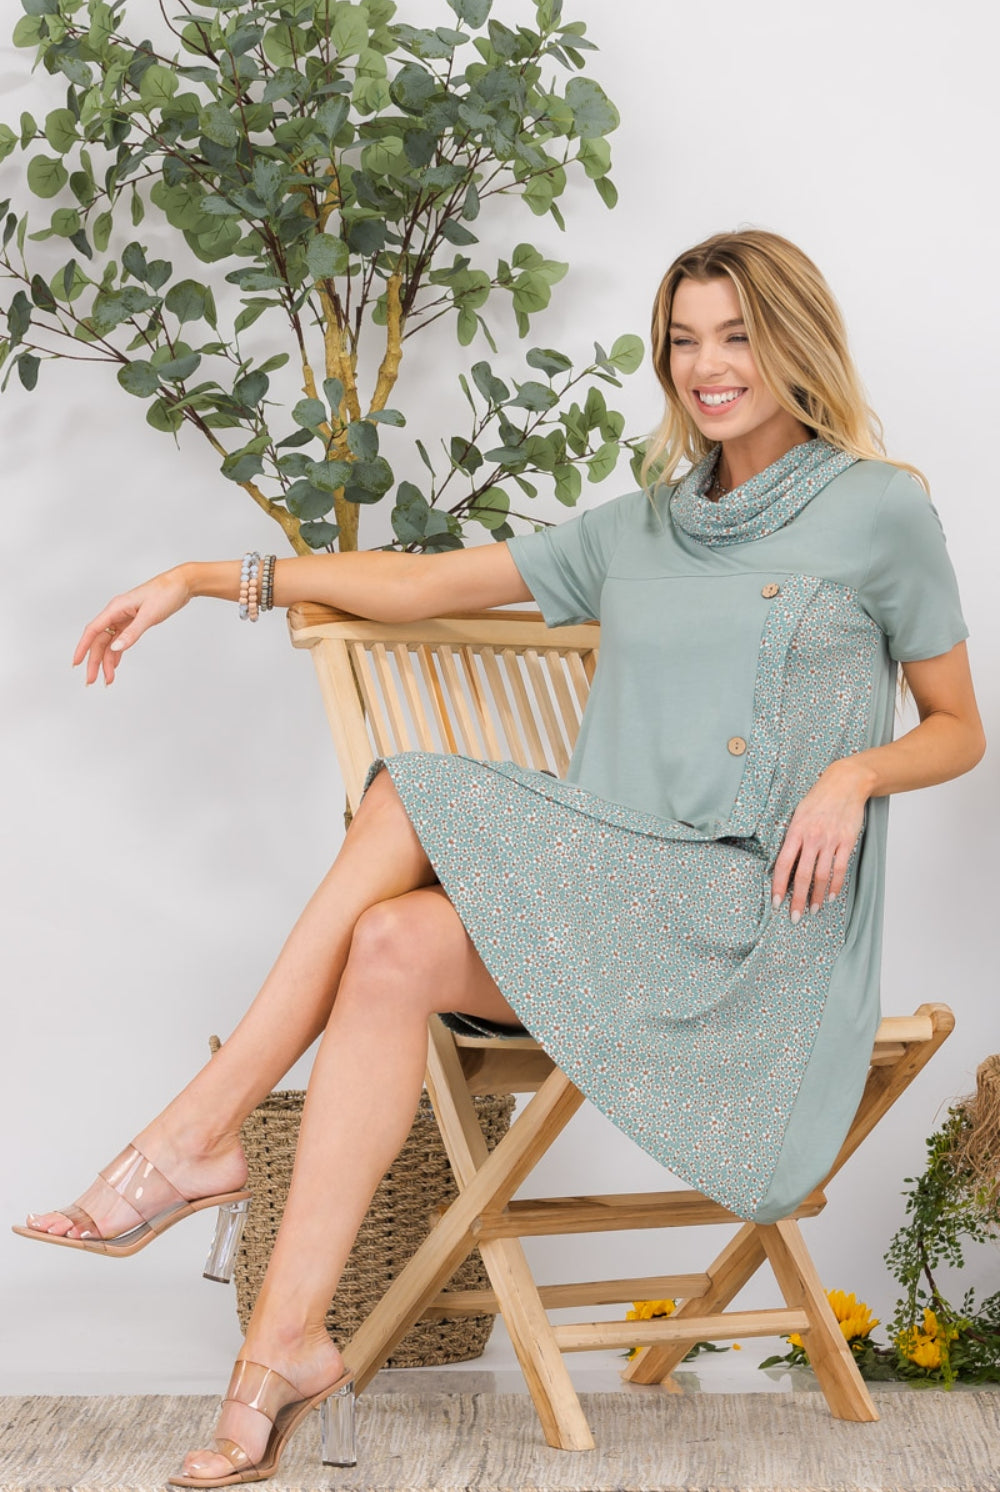 A woman beams in her Chic Asymmetrical Short Sleeve Dress, boasting an innovative hemline and detailed buttons, perfect for a fresh and fashionable look.